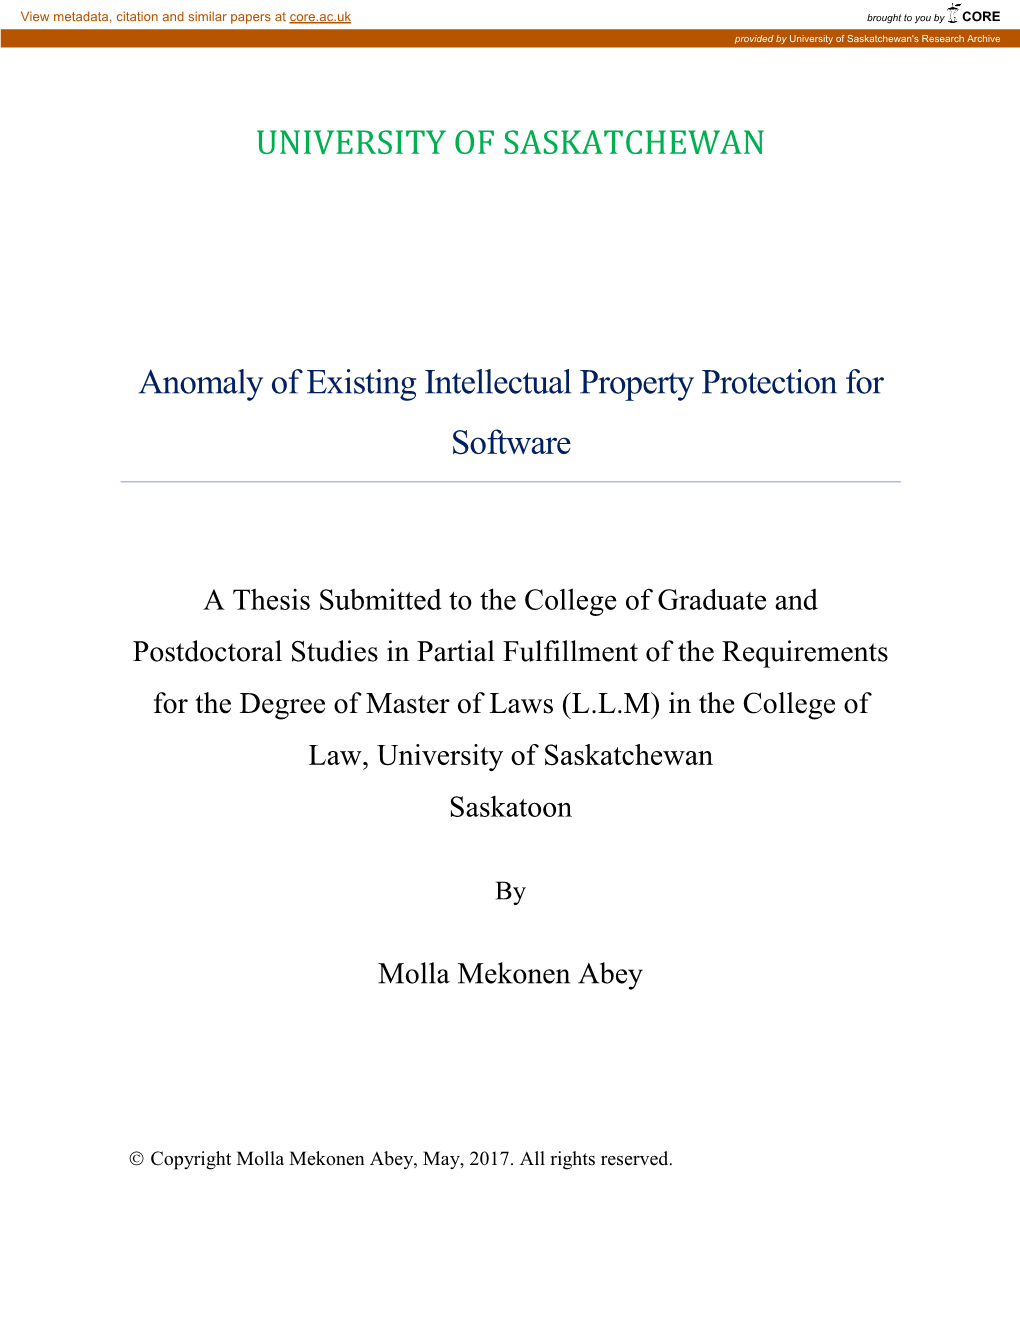 Anomaly of Existing Intellectual Property Protection for Software